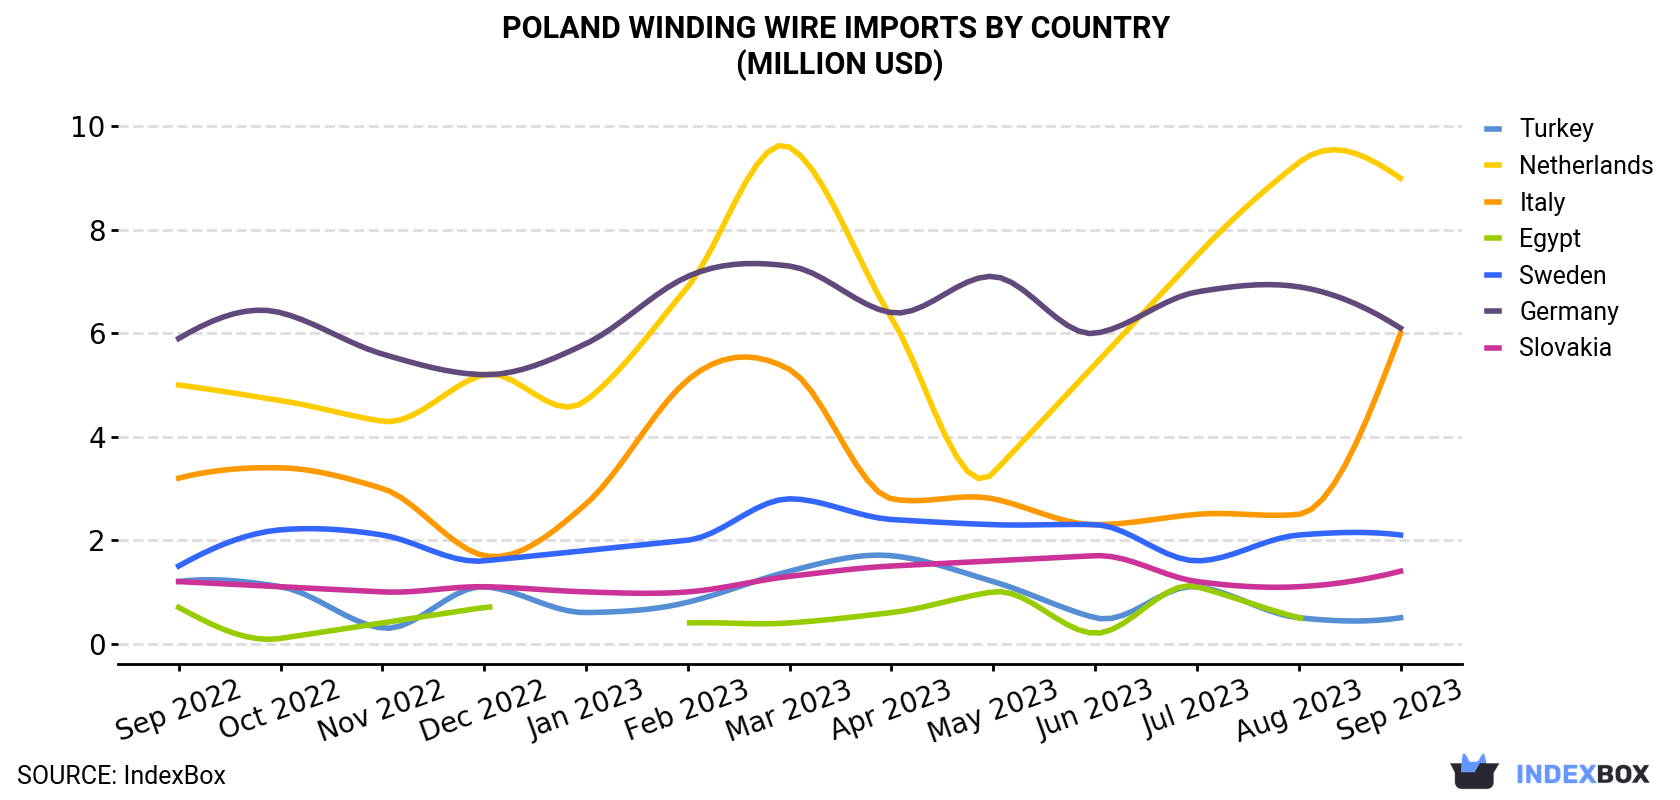 Poland Winding Wire Imports By Country (Million USD)